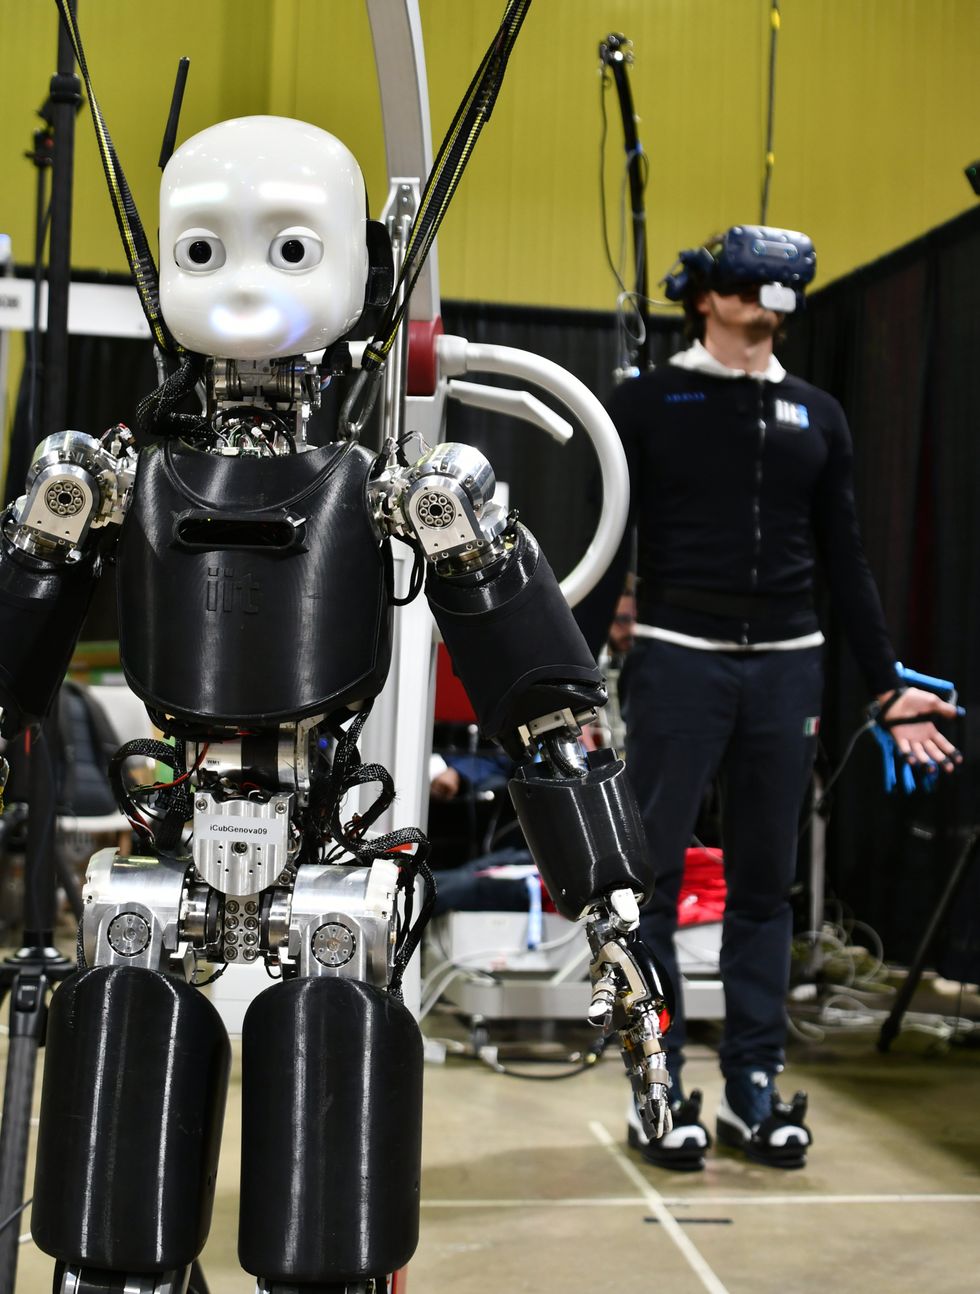 A small humanoid robot stands in the foreground while a human in a VR headset stands in the background, controlling the robot through his motions.